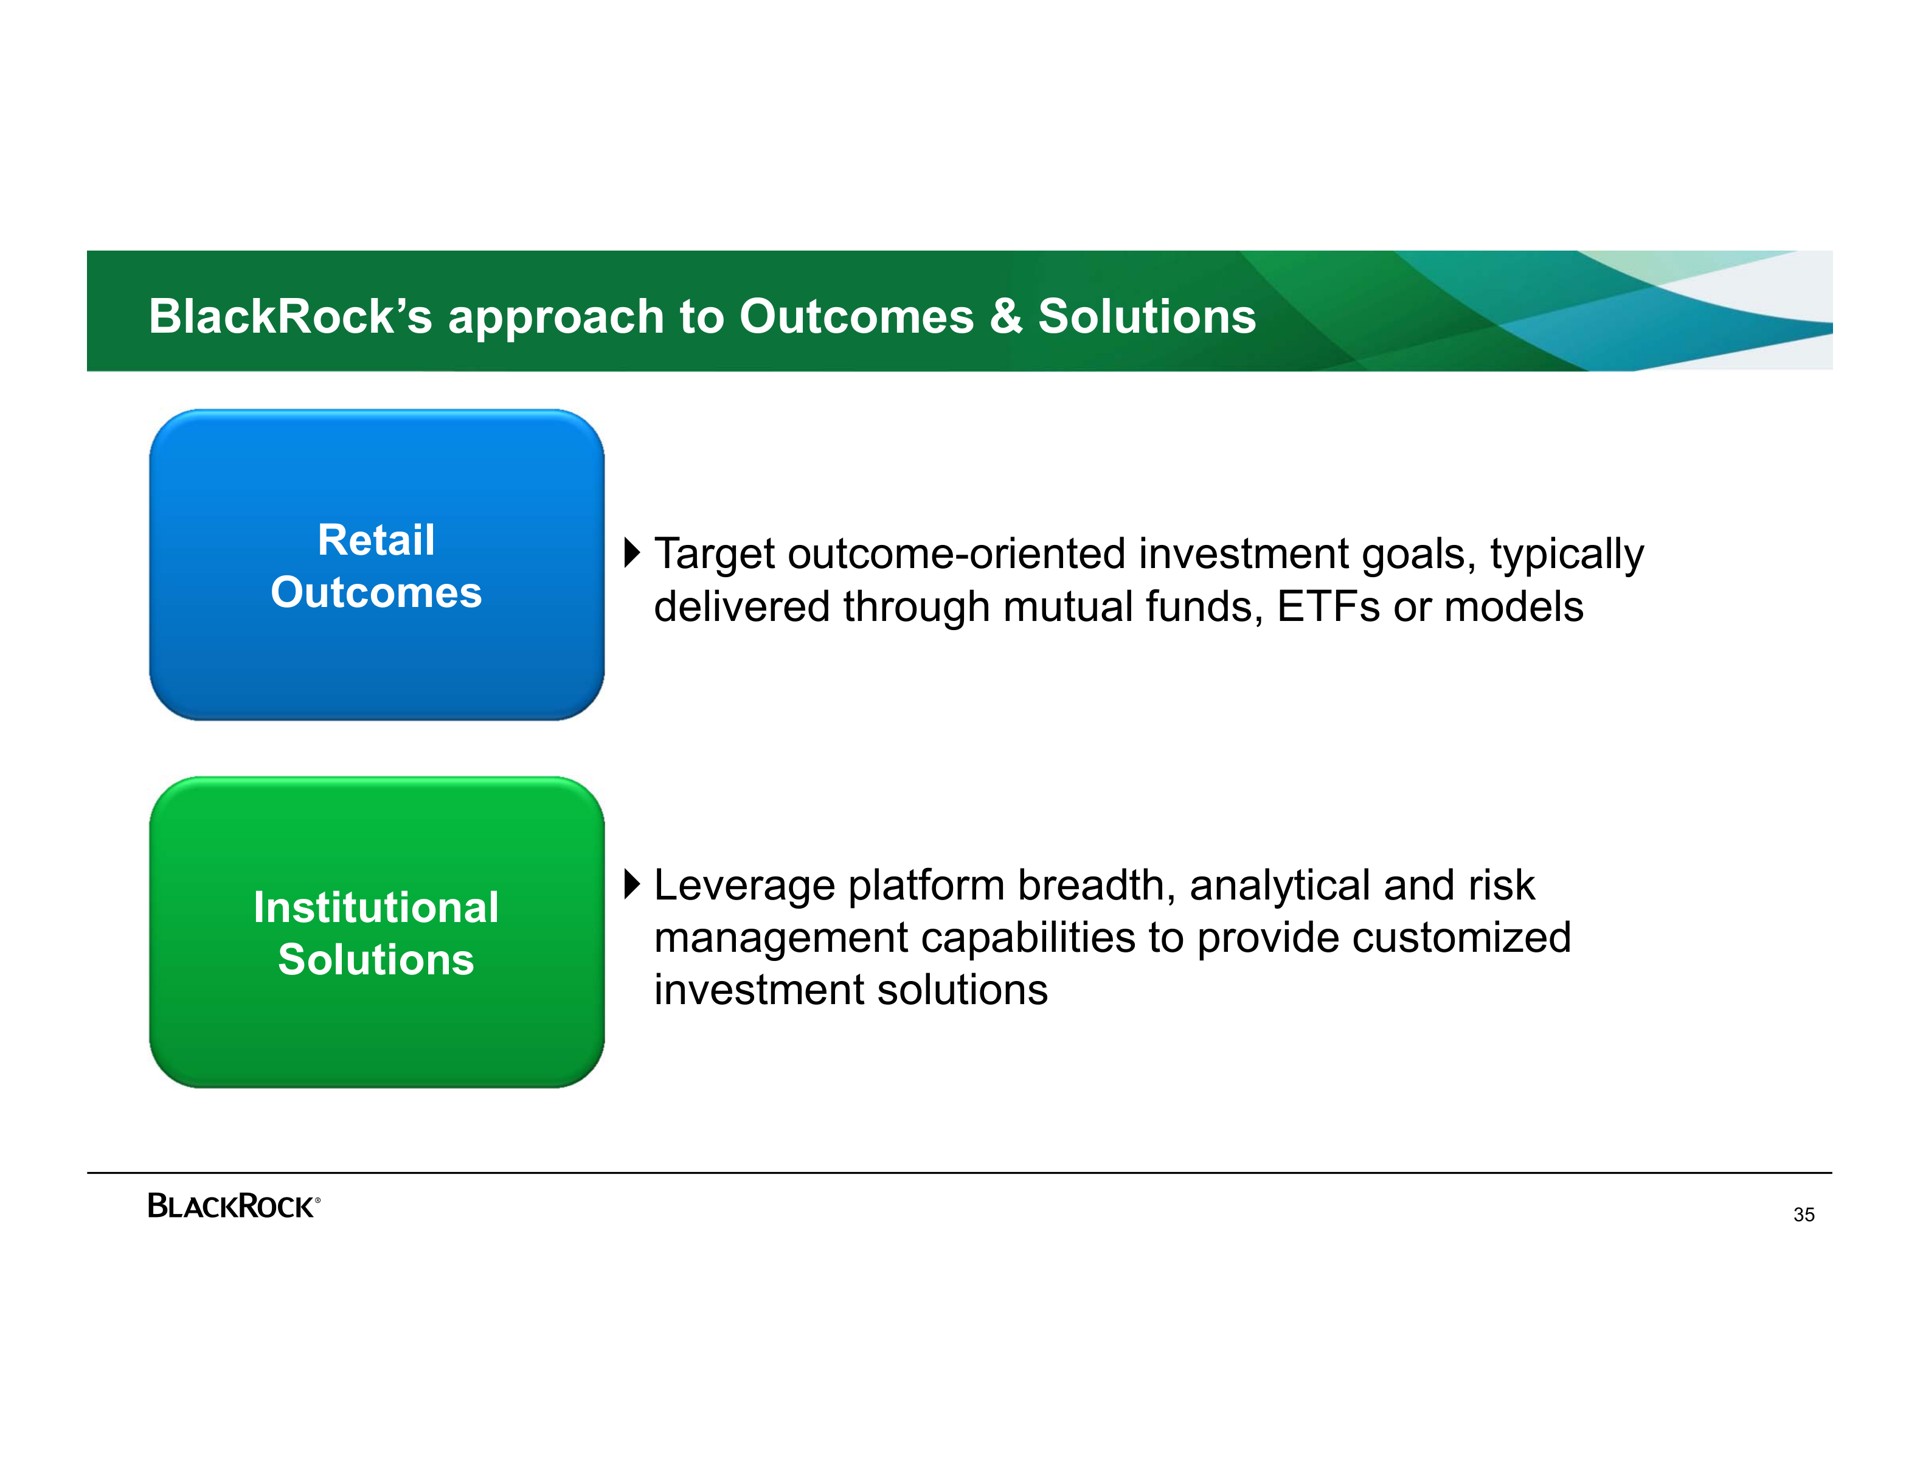 approach to outcomes solutions retail outcomes target outcome oriented investment goals typically delivered through mutual funds or models institutional solutions leverage platform breadth analytical and risk management capabilities to provide investment solutions | BlackRock